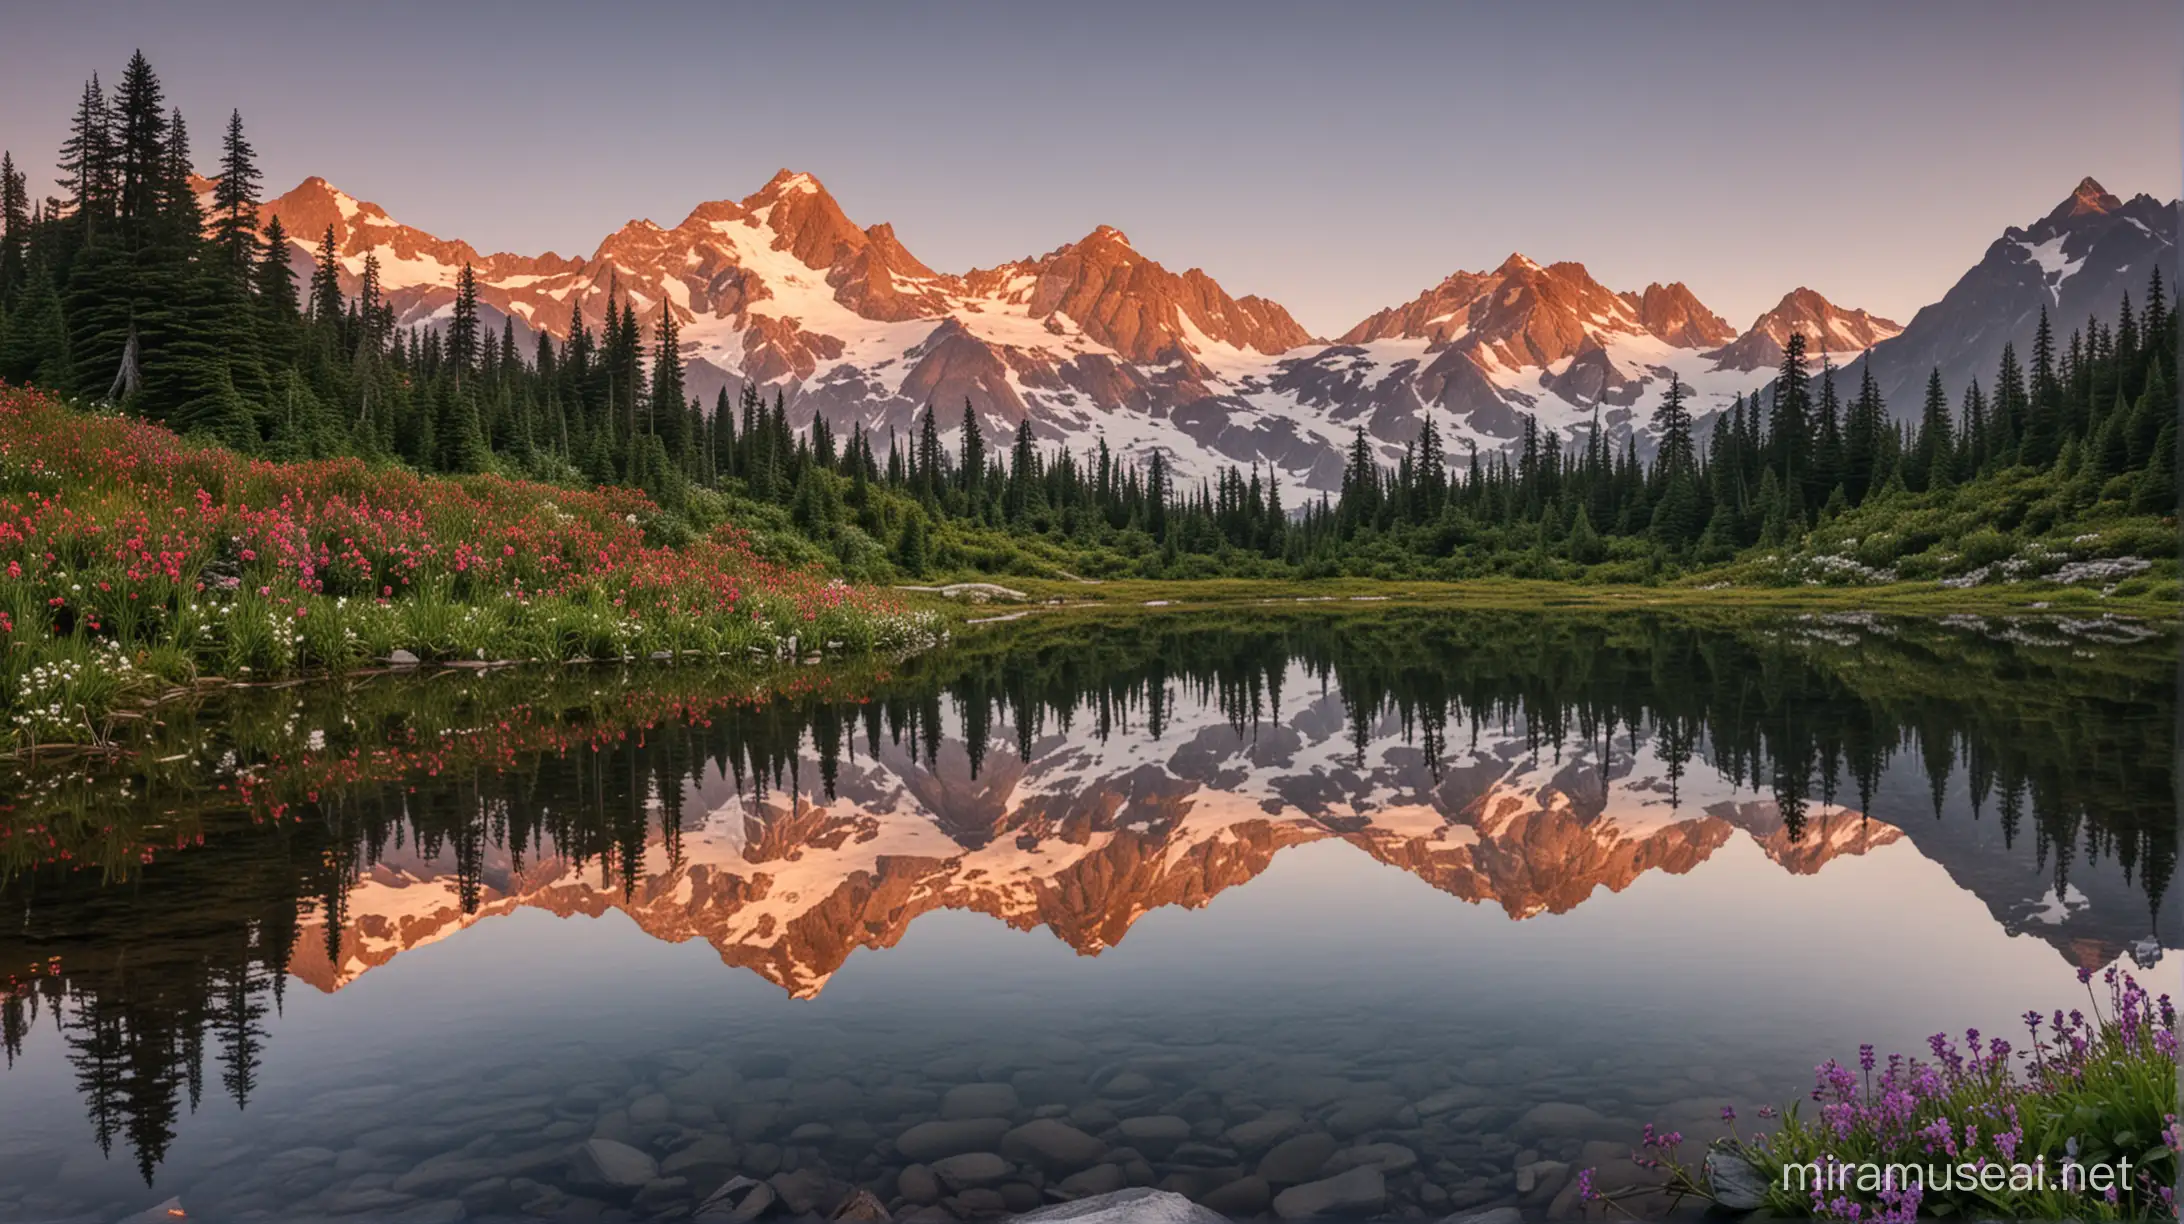 Sunrise behind Mt Shuksan with Flowers and Picture Lake Reflection